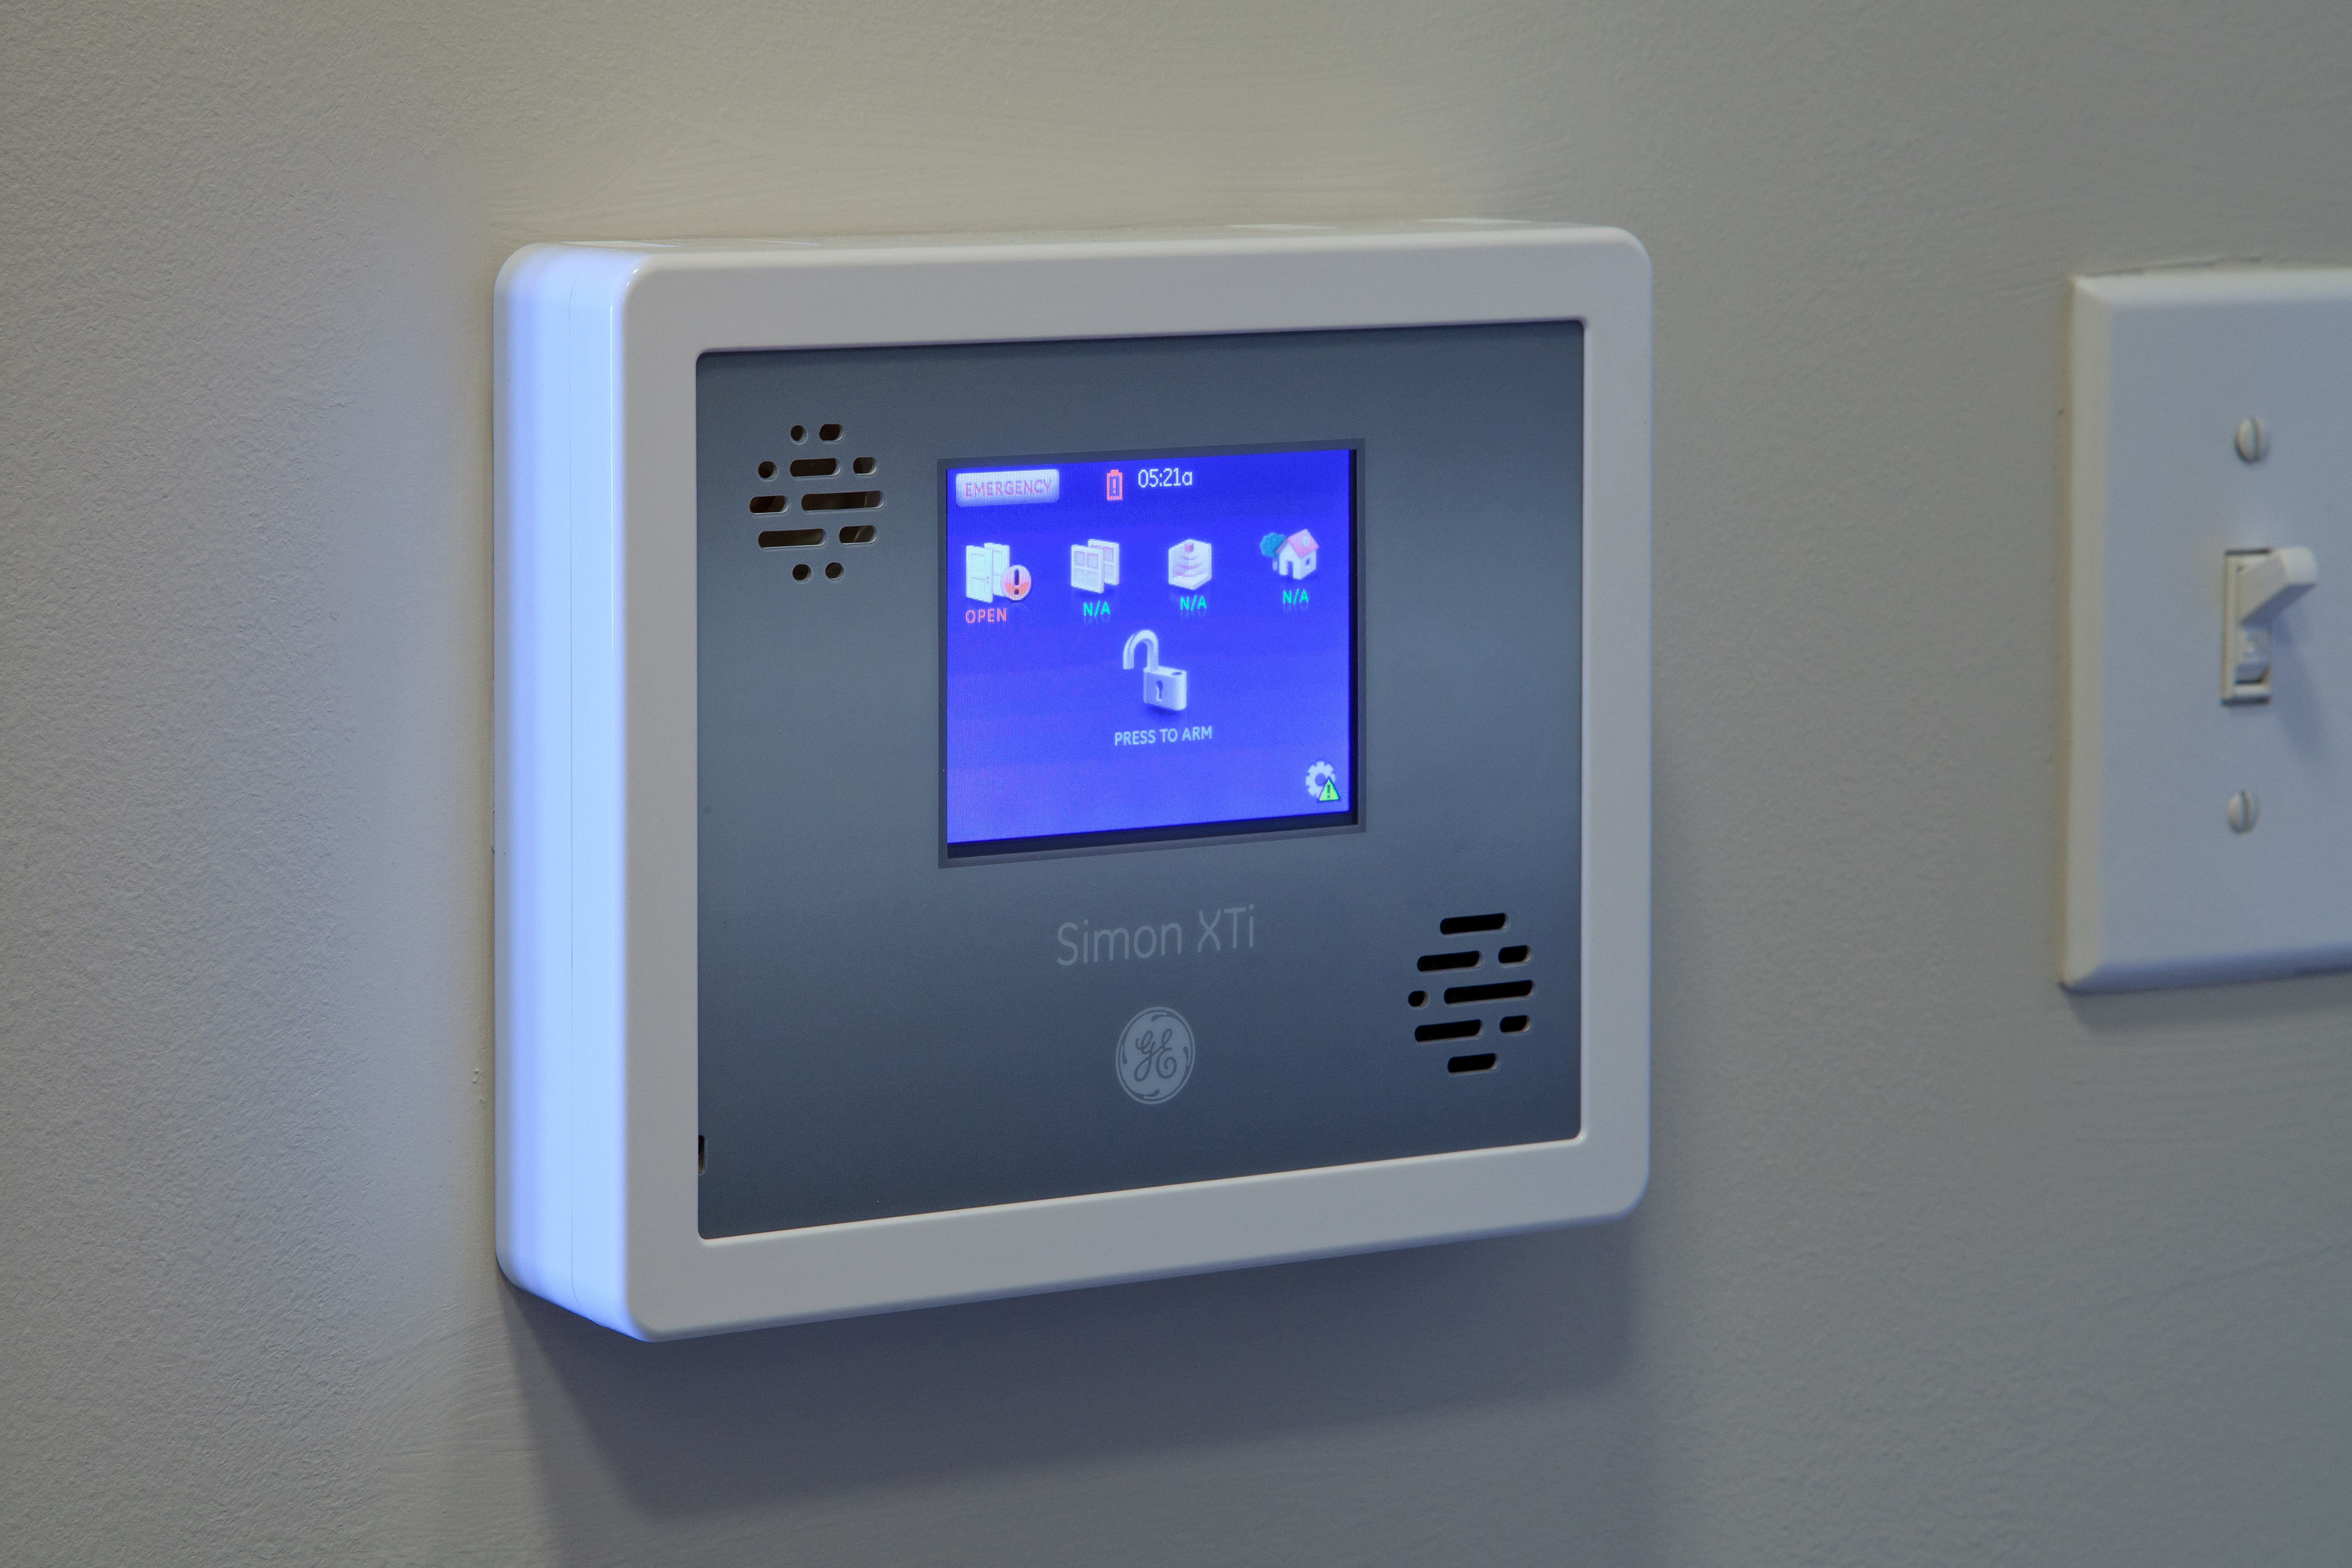 Modern, in-home electronic thermostats